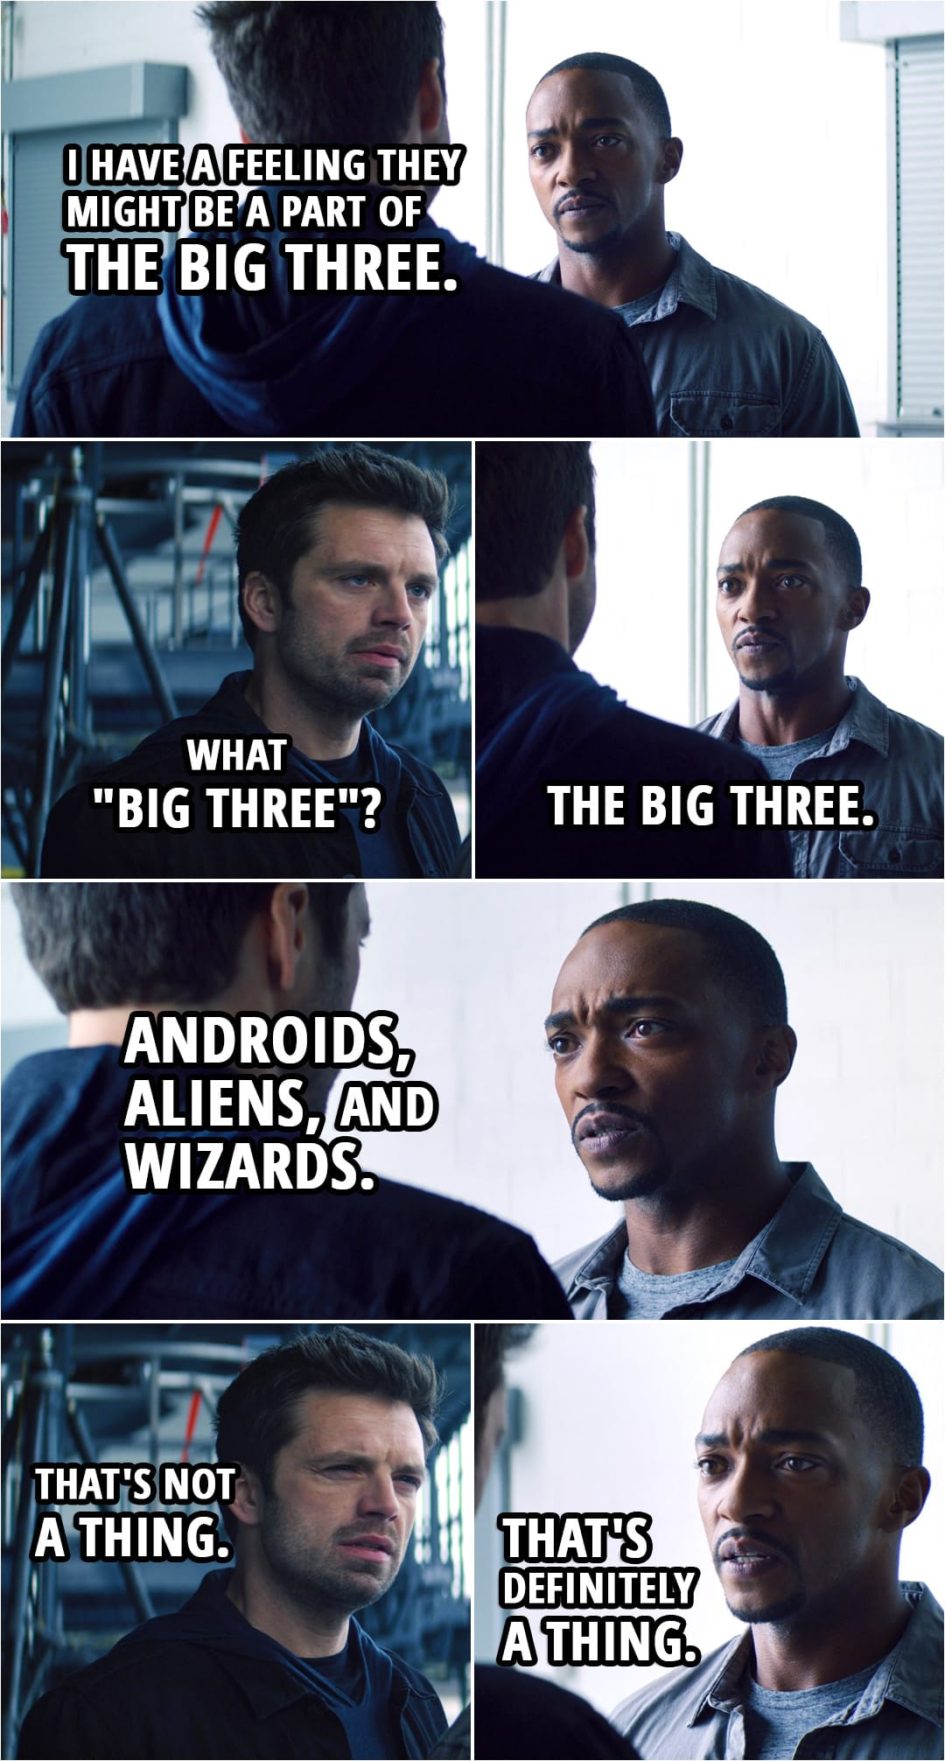 Quote from The Falcon and The Winter Soldier 1x02 | Sam Wilson: I have a feeling they might be a part of the Big Three. Bucky Barnes: What "Big Three"? Sam Wilson: The Big Three. Bucky Barnes: What Big Three? Sam Wilson: Androids, aliens, and wizards. Bucky Barnes: That's not a thing. Sam Wilson: That's definitely a thing. Bucky Barnes: No, it's not. Sam Wilson: Every time we fight, we fight one of the three.